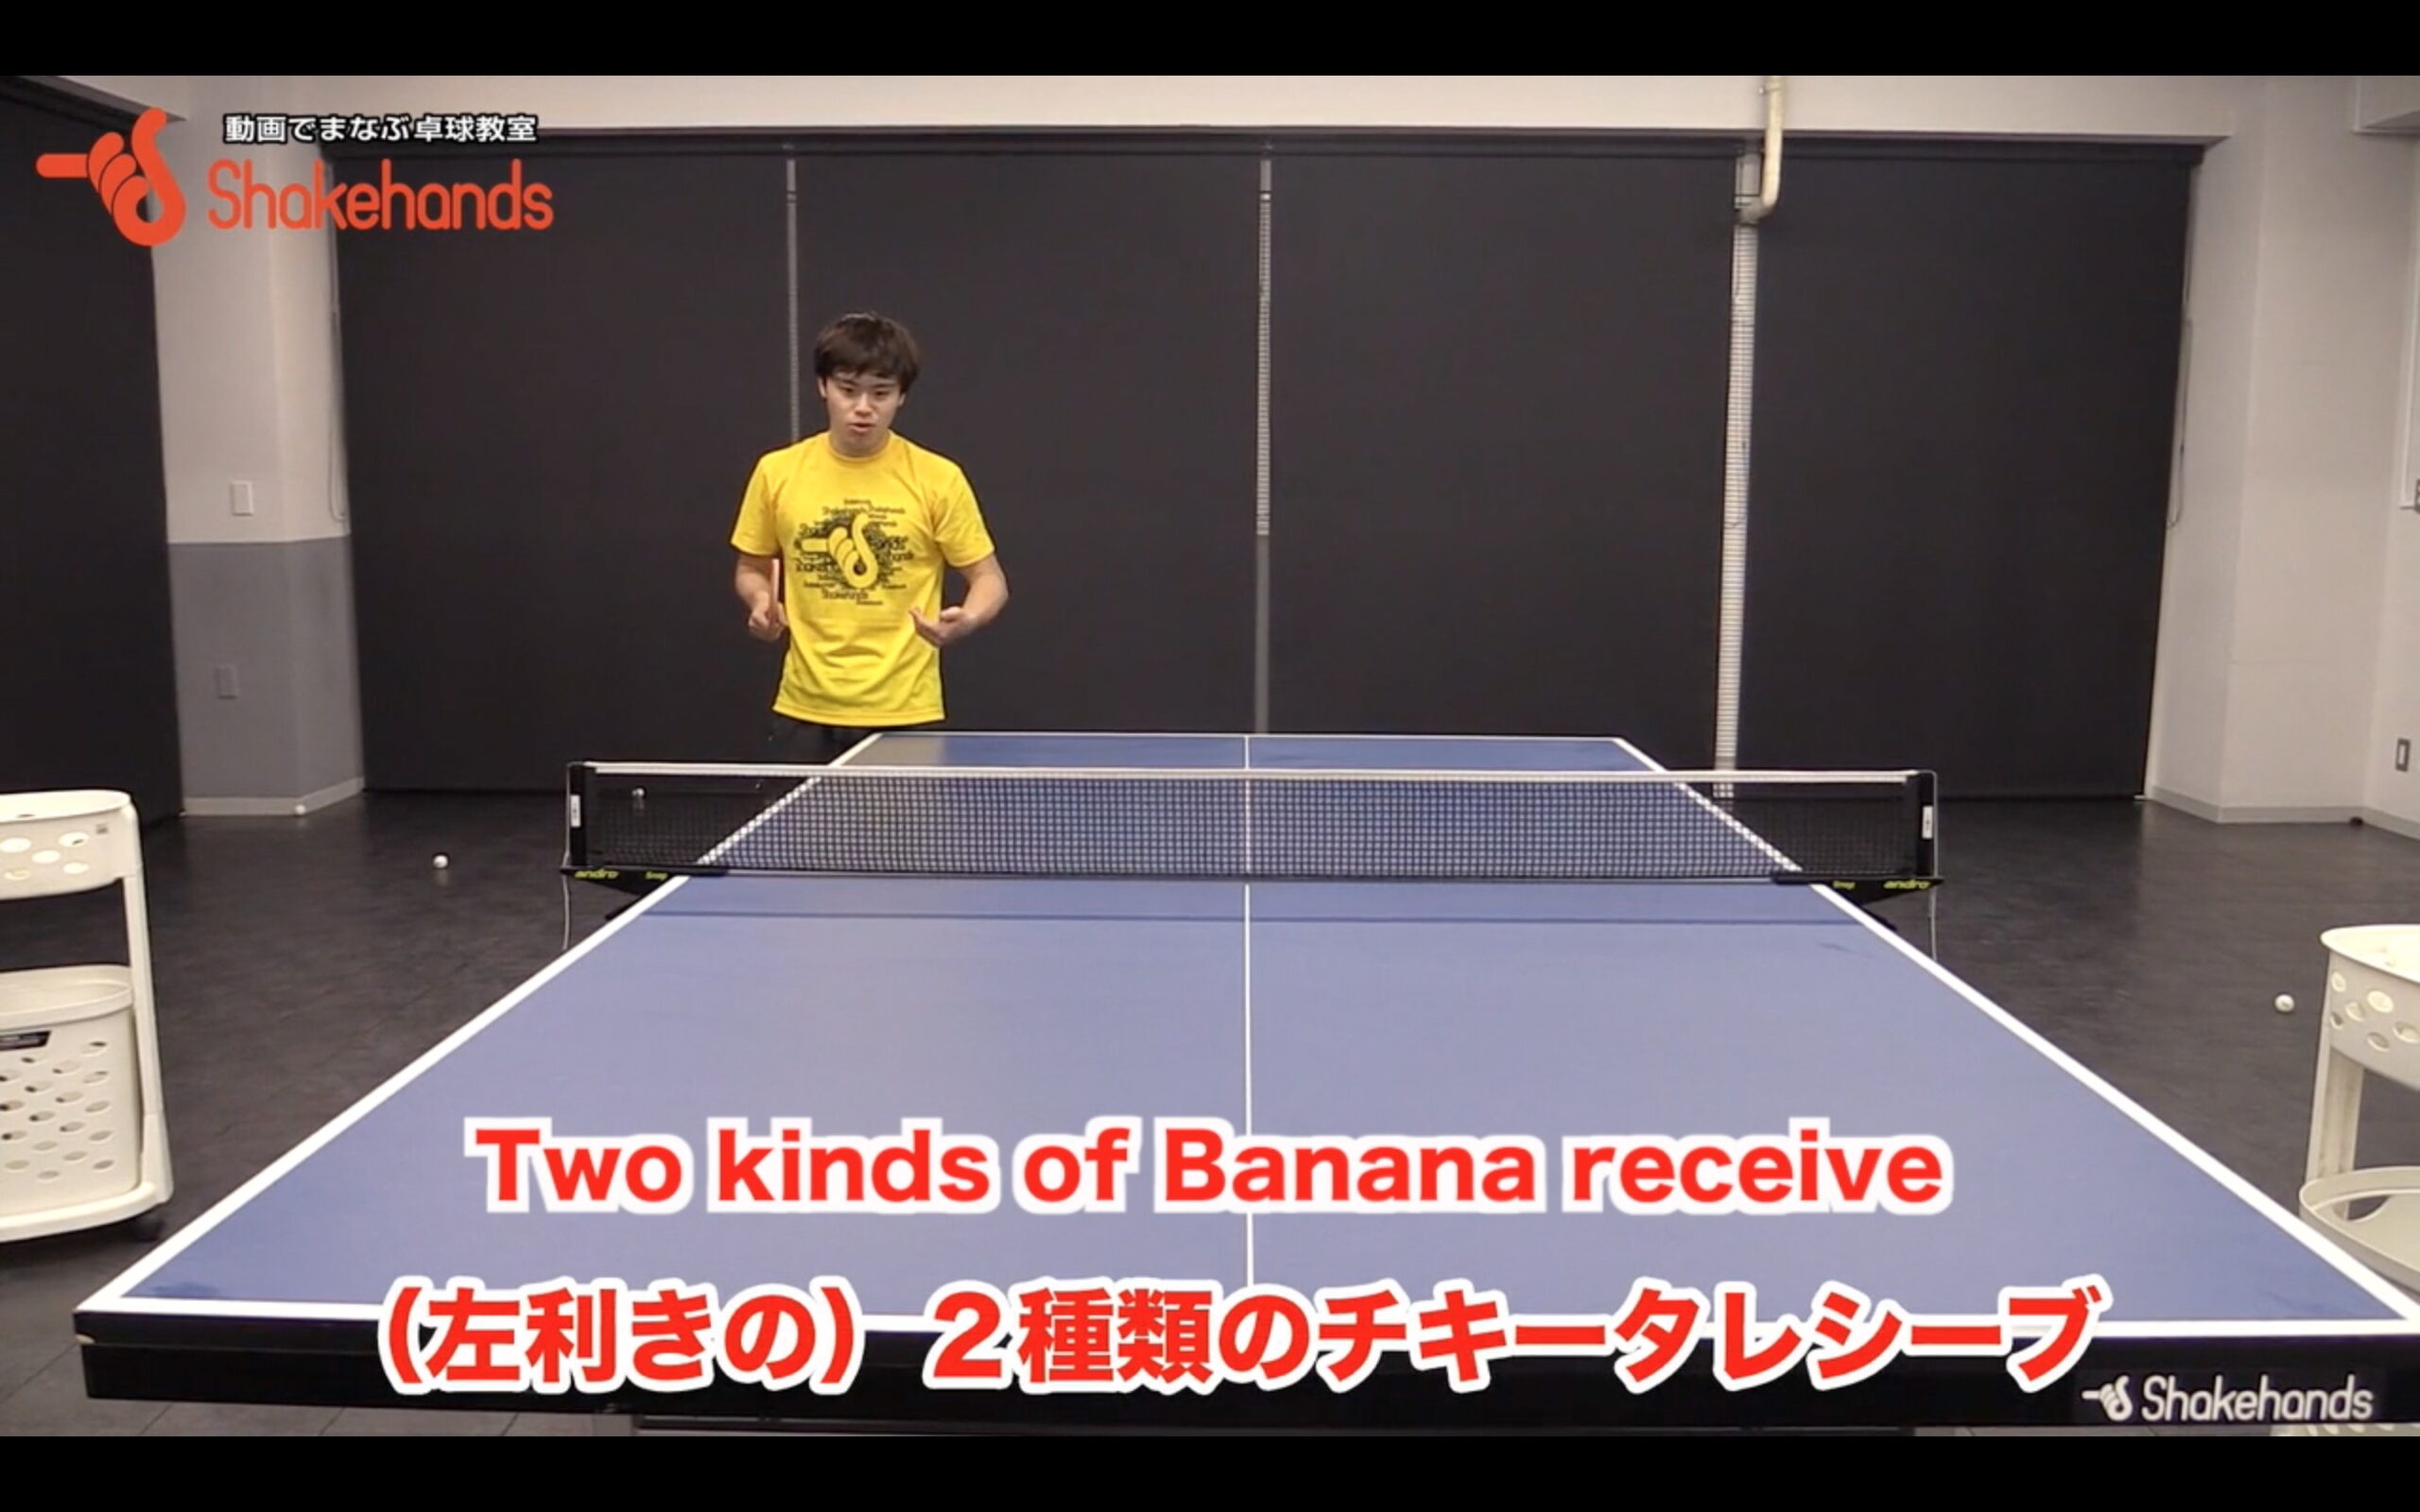 Two kinds of banana receive